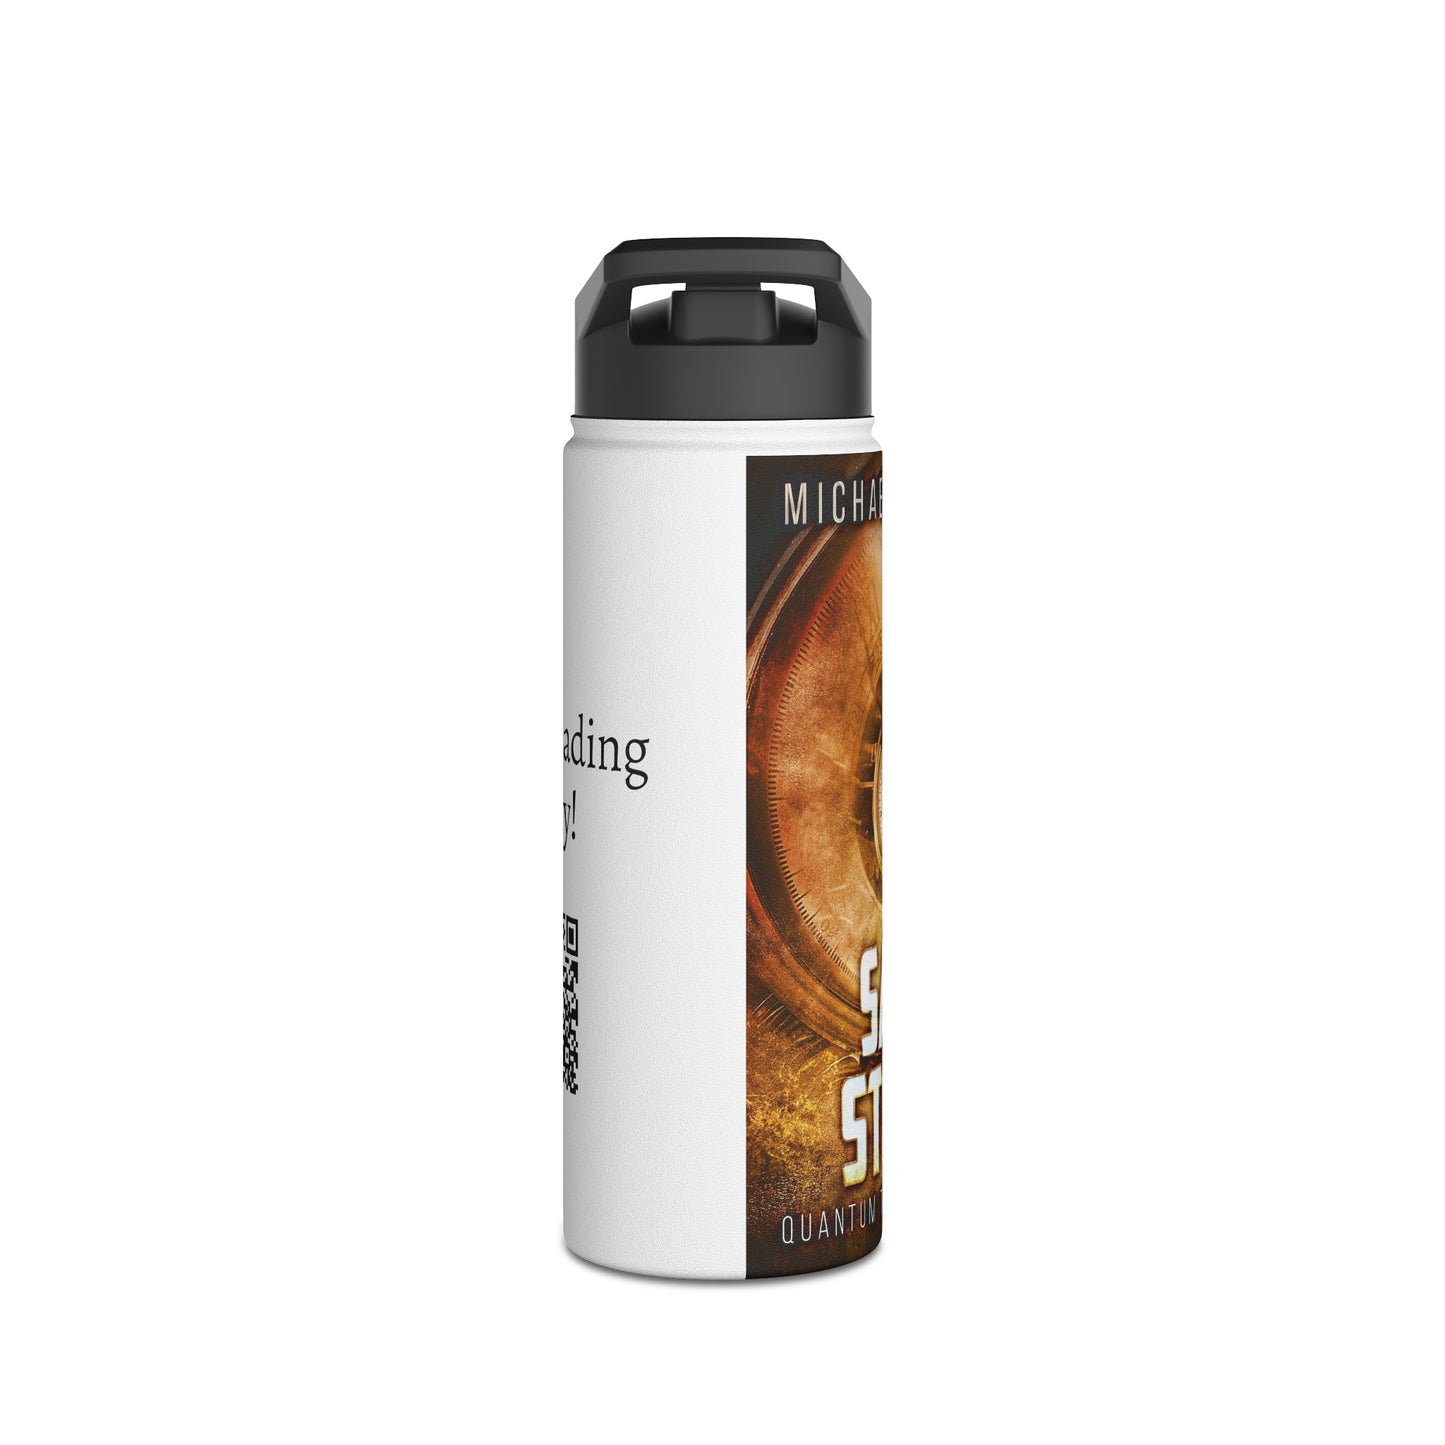 Sand Storm - Stainless Steel Water Bottle